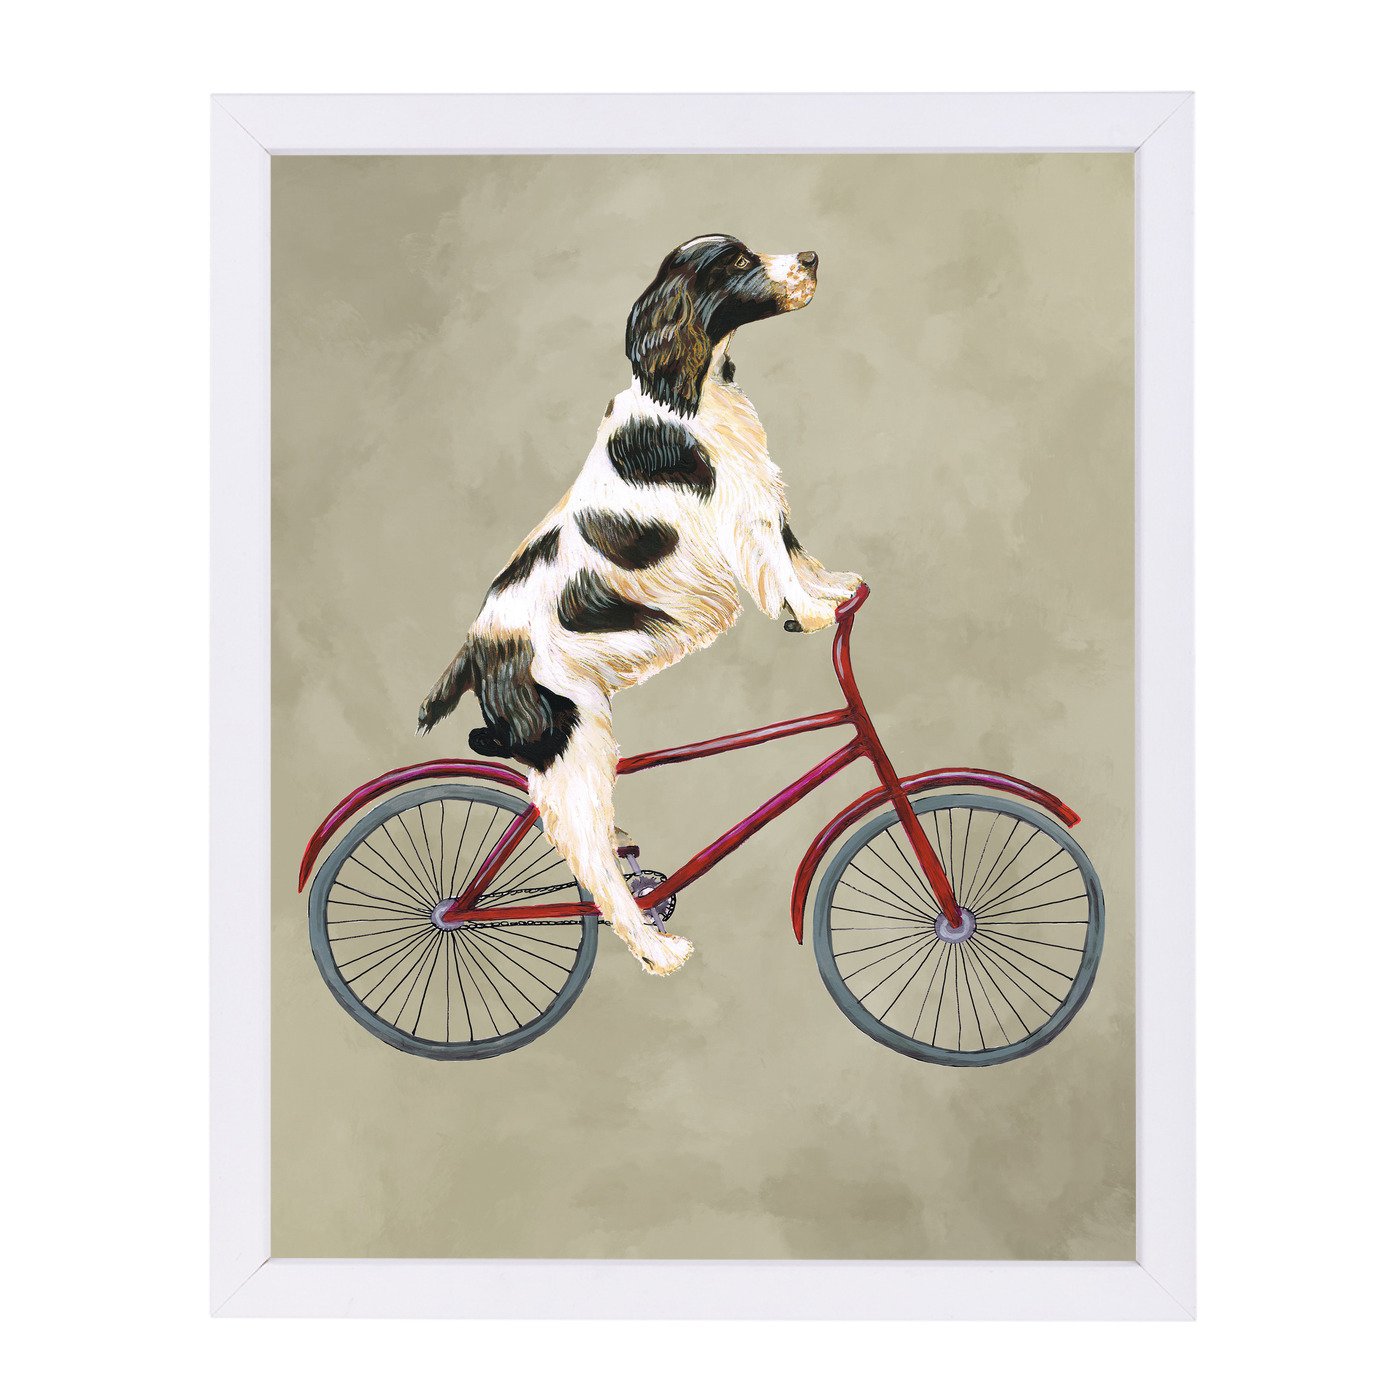 English Springer On Bicycle By Coco De Paris - Framed Print - Americanflat